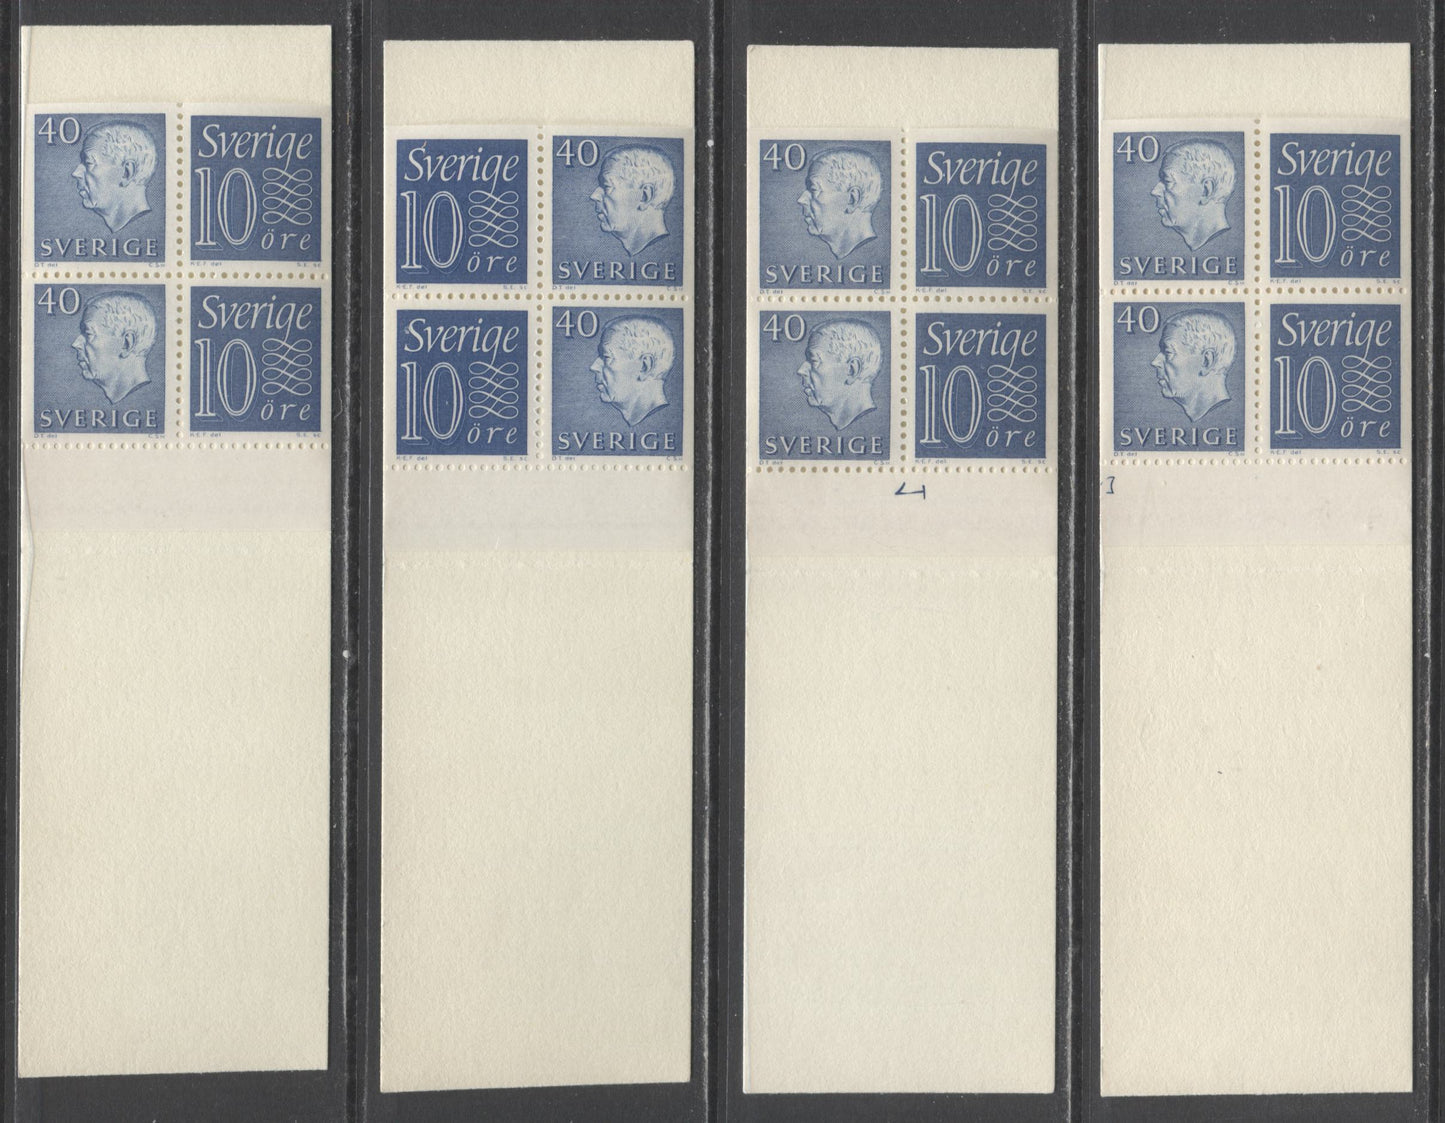 Lot 192 Sweden SC#669b (Facit #HA12ARV)/669b (Facit #HA12B1RV) 1964 Re-Engraved King Gustav VI Adolf Definitive Issue, Upright And Inverted Panes, 10 Ore Stamps At Left And Right, Cylinder Numbers, 4 VFNH Booklets of 4 (2 +2),  Estimated Value $8